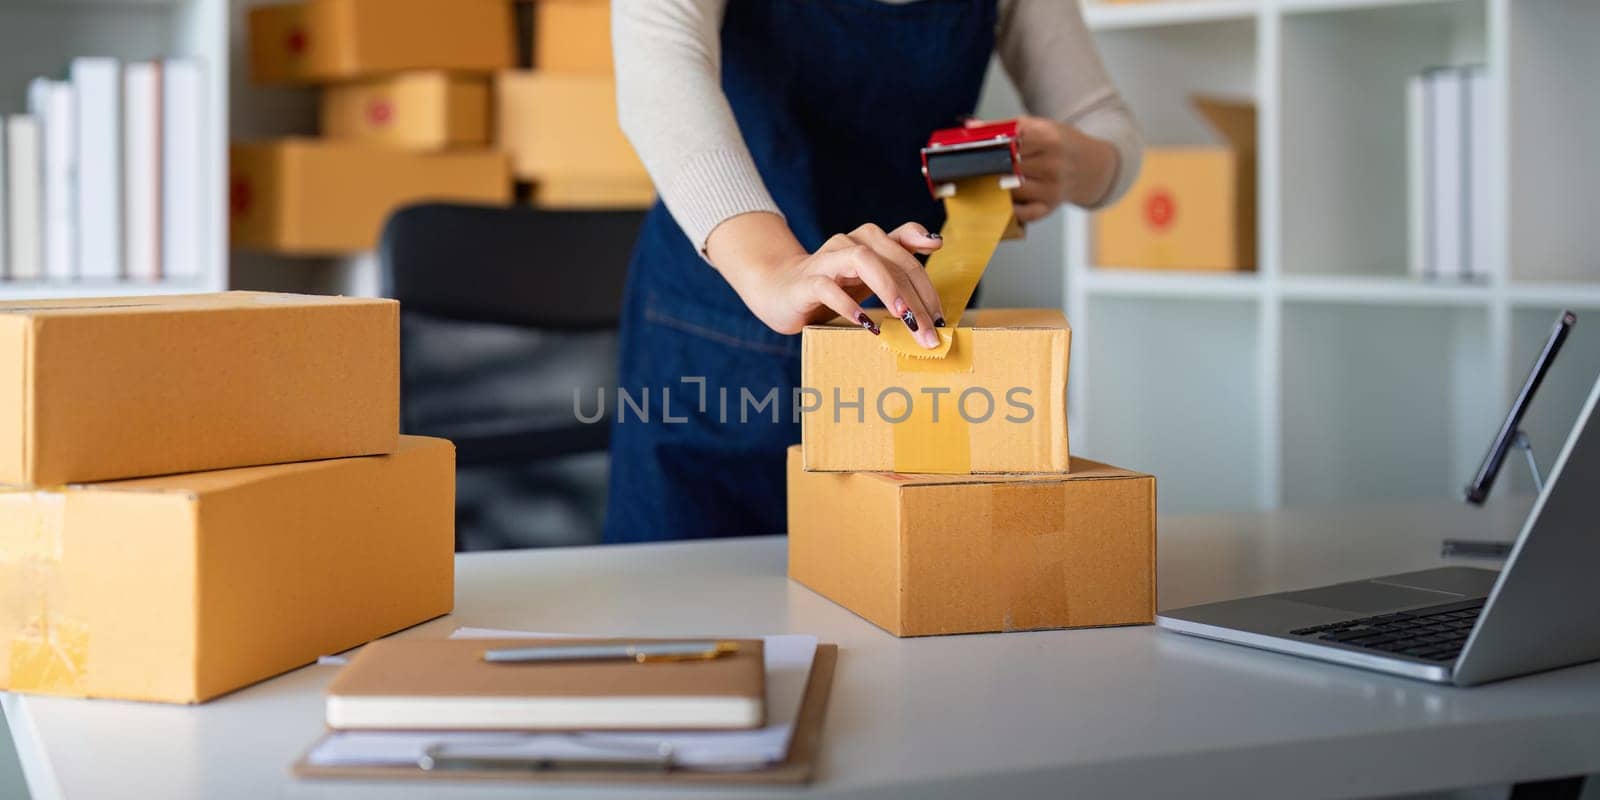 Woman use scotch tape to attach parcel box to prepare goods for the process of packaging, shipping, online sale internet marketing ecommerce concept startup business idea by nateemee